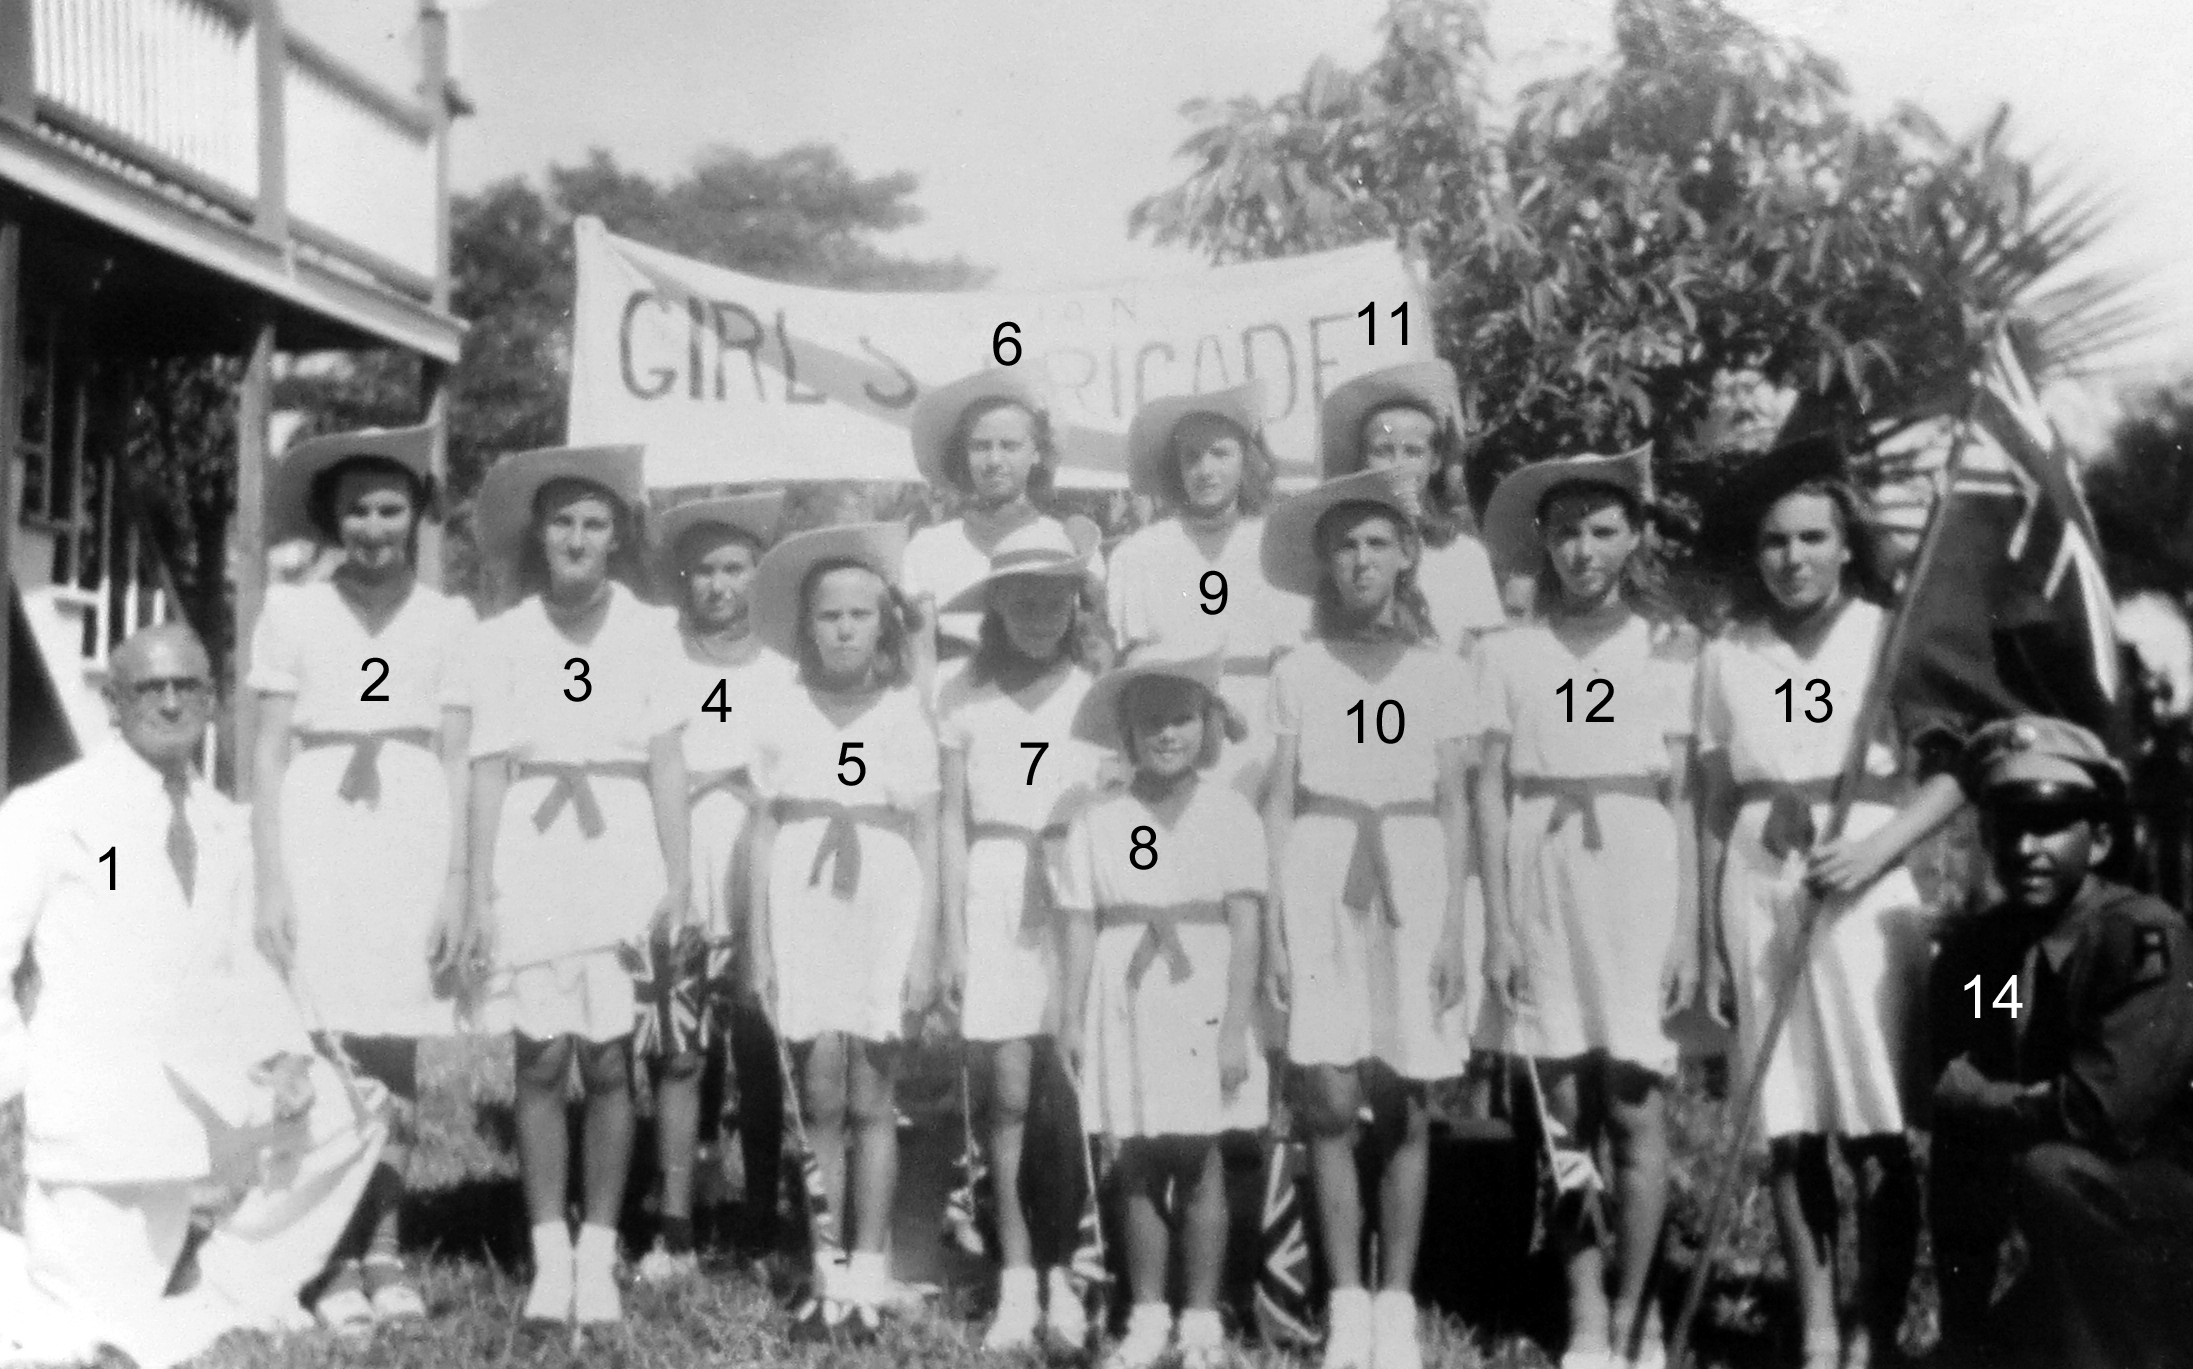 Recognize any of the members of the Green Turtle Cay Girls' Brigade?